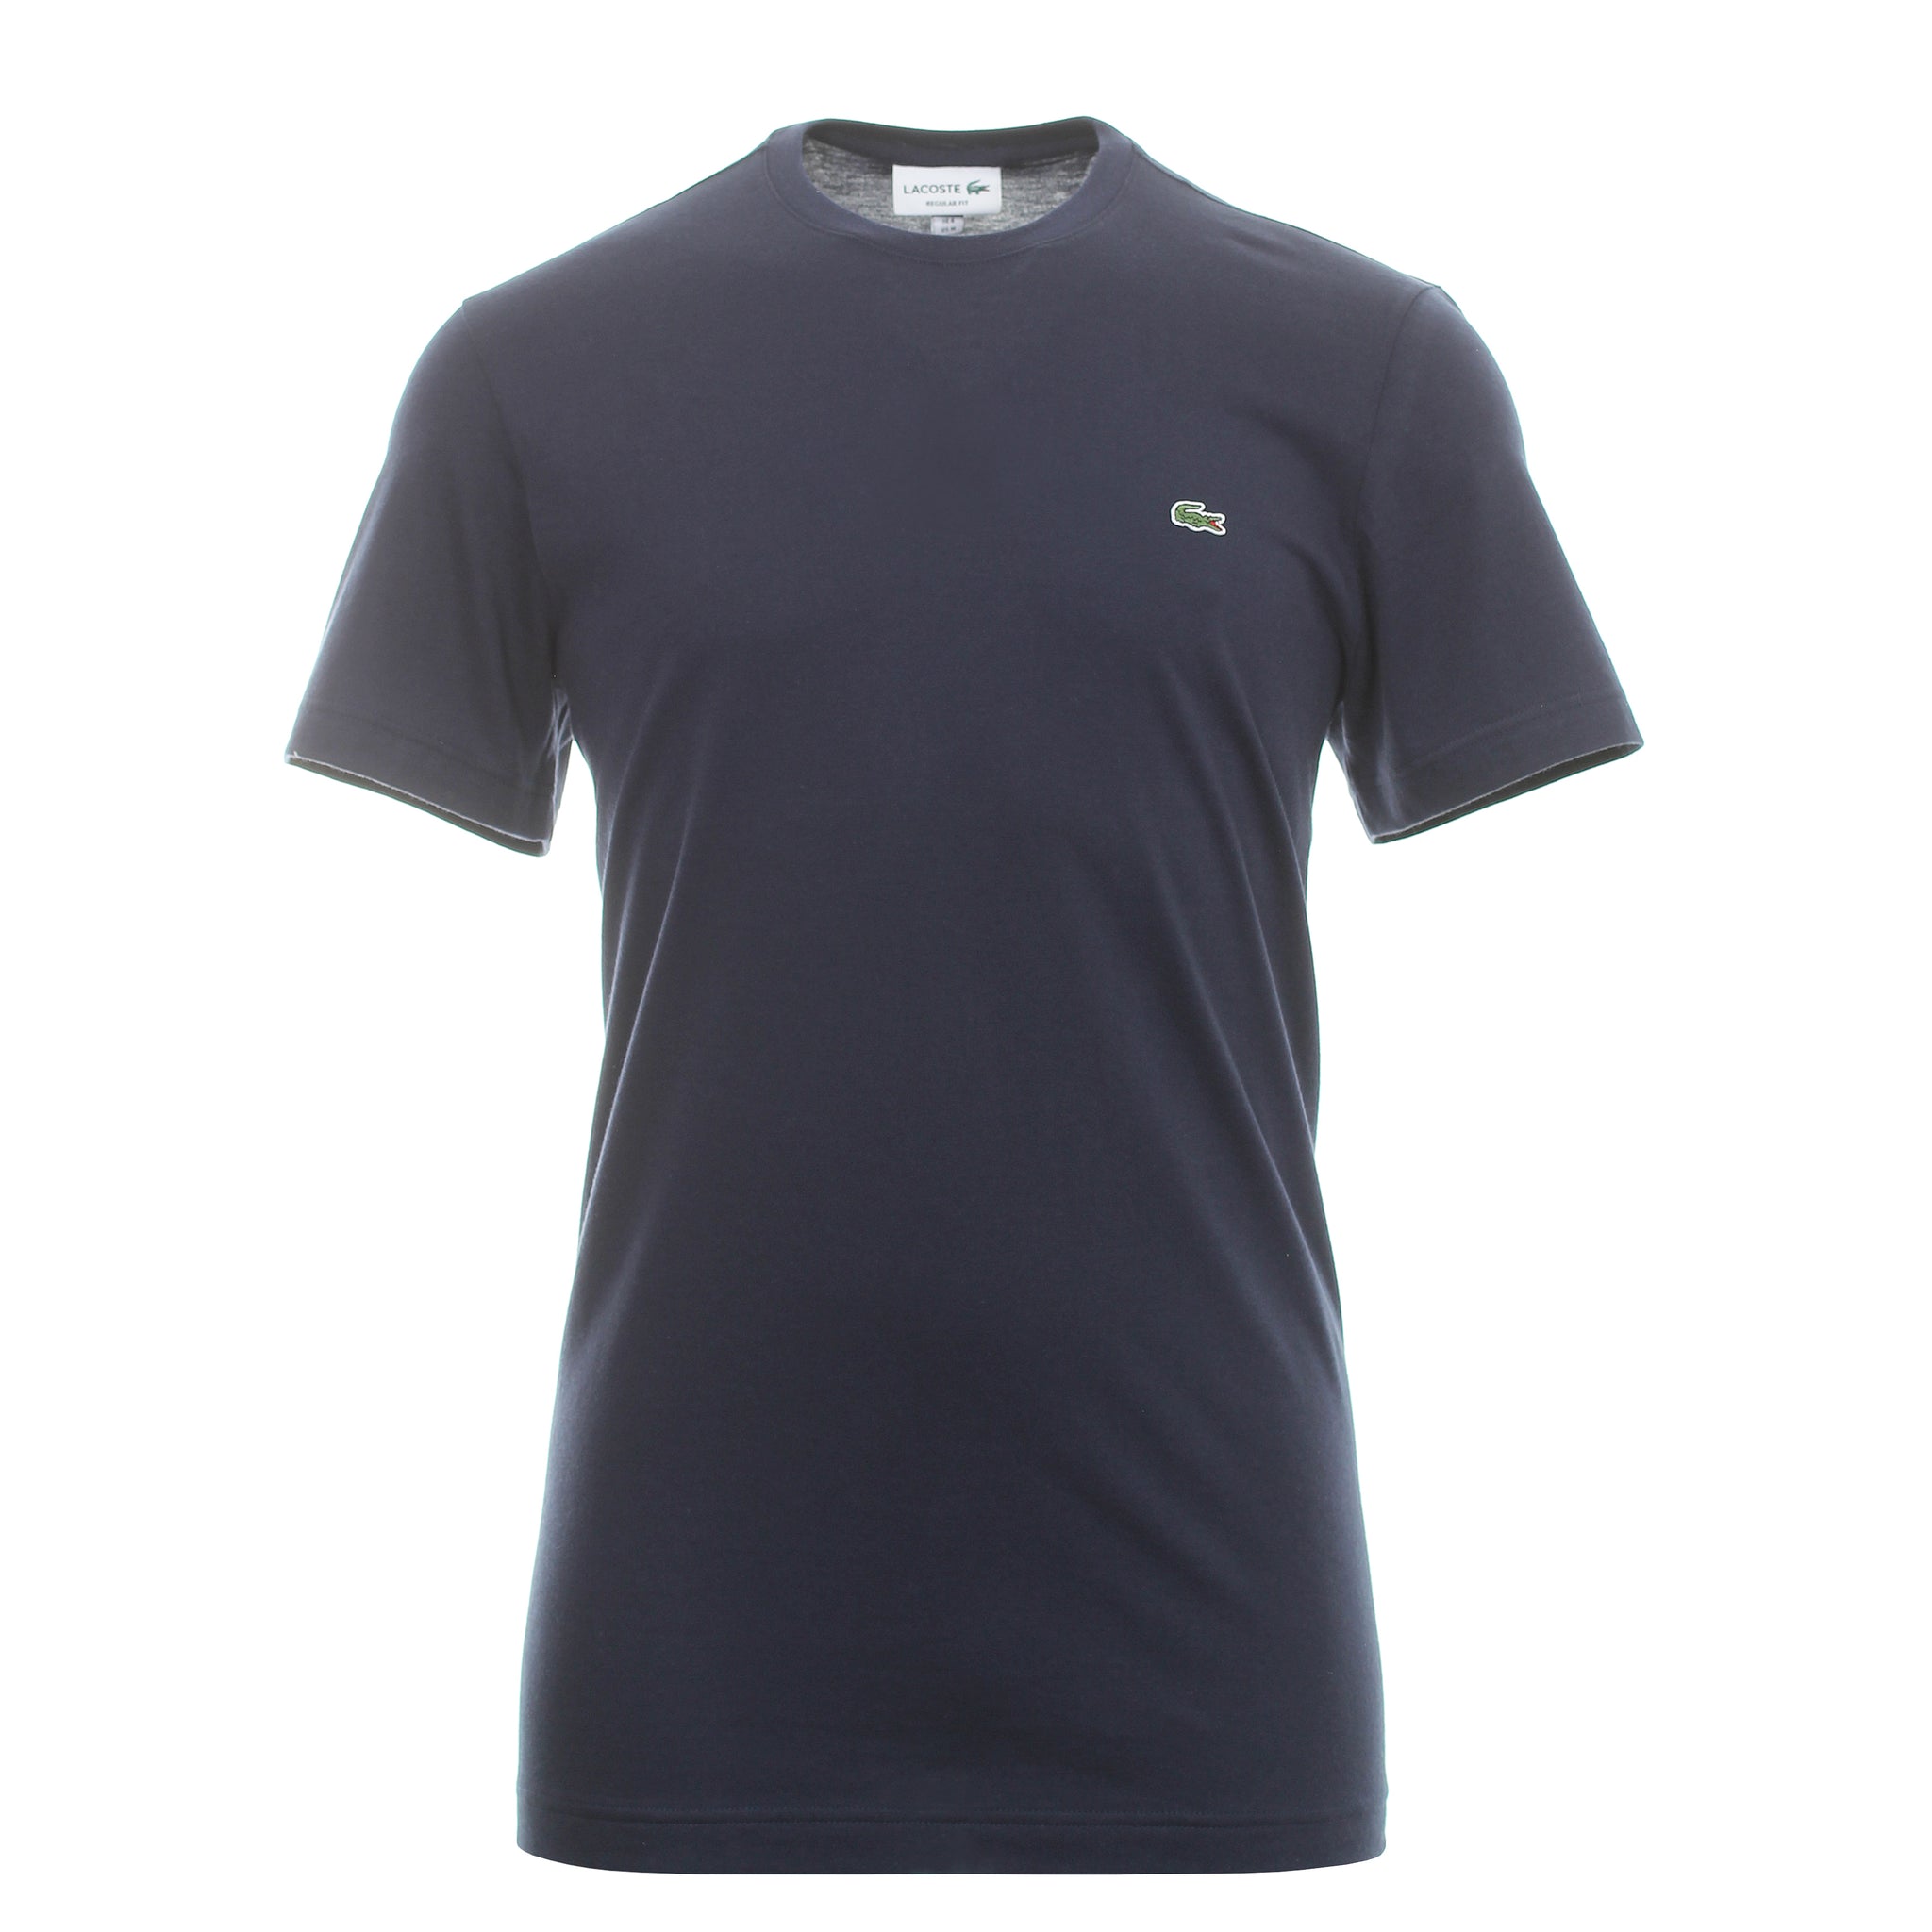 Lacoste Basic Cotton Tee Shirt TH2038 Navy 166 | Function18 | Restrictedgs